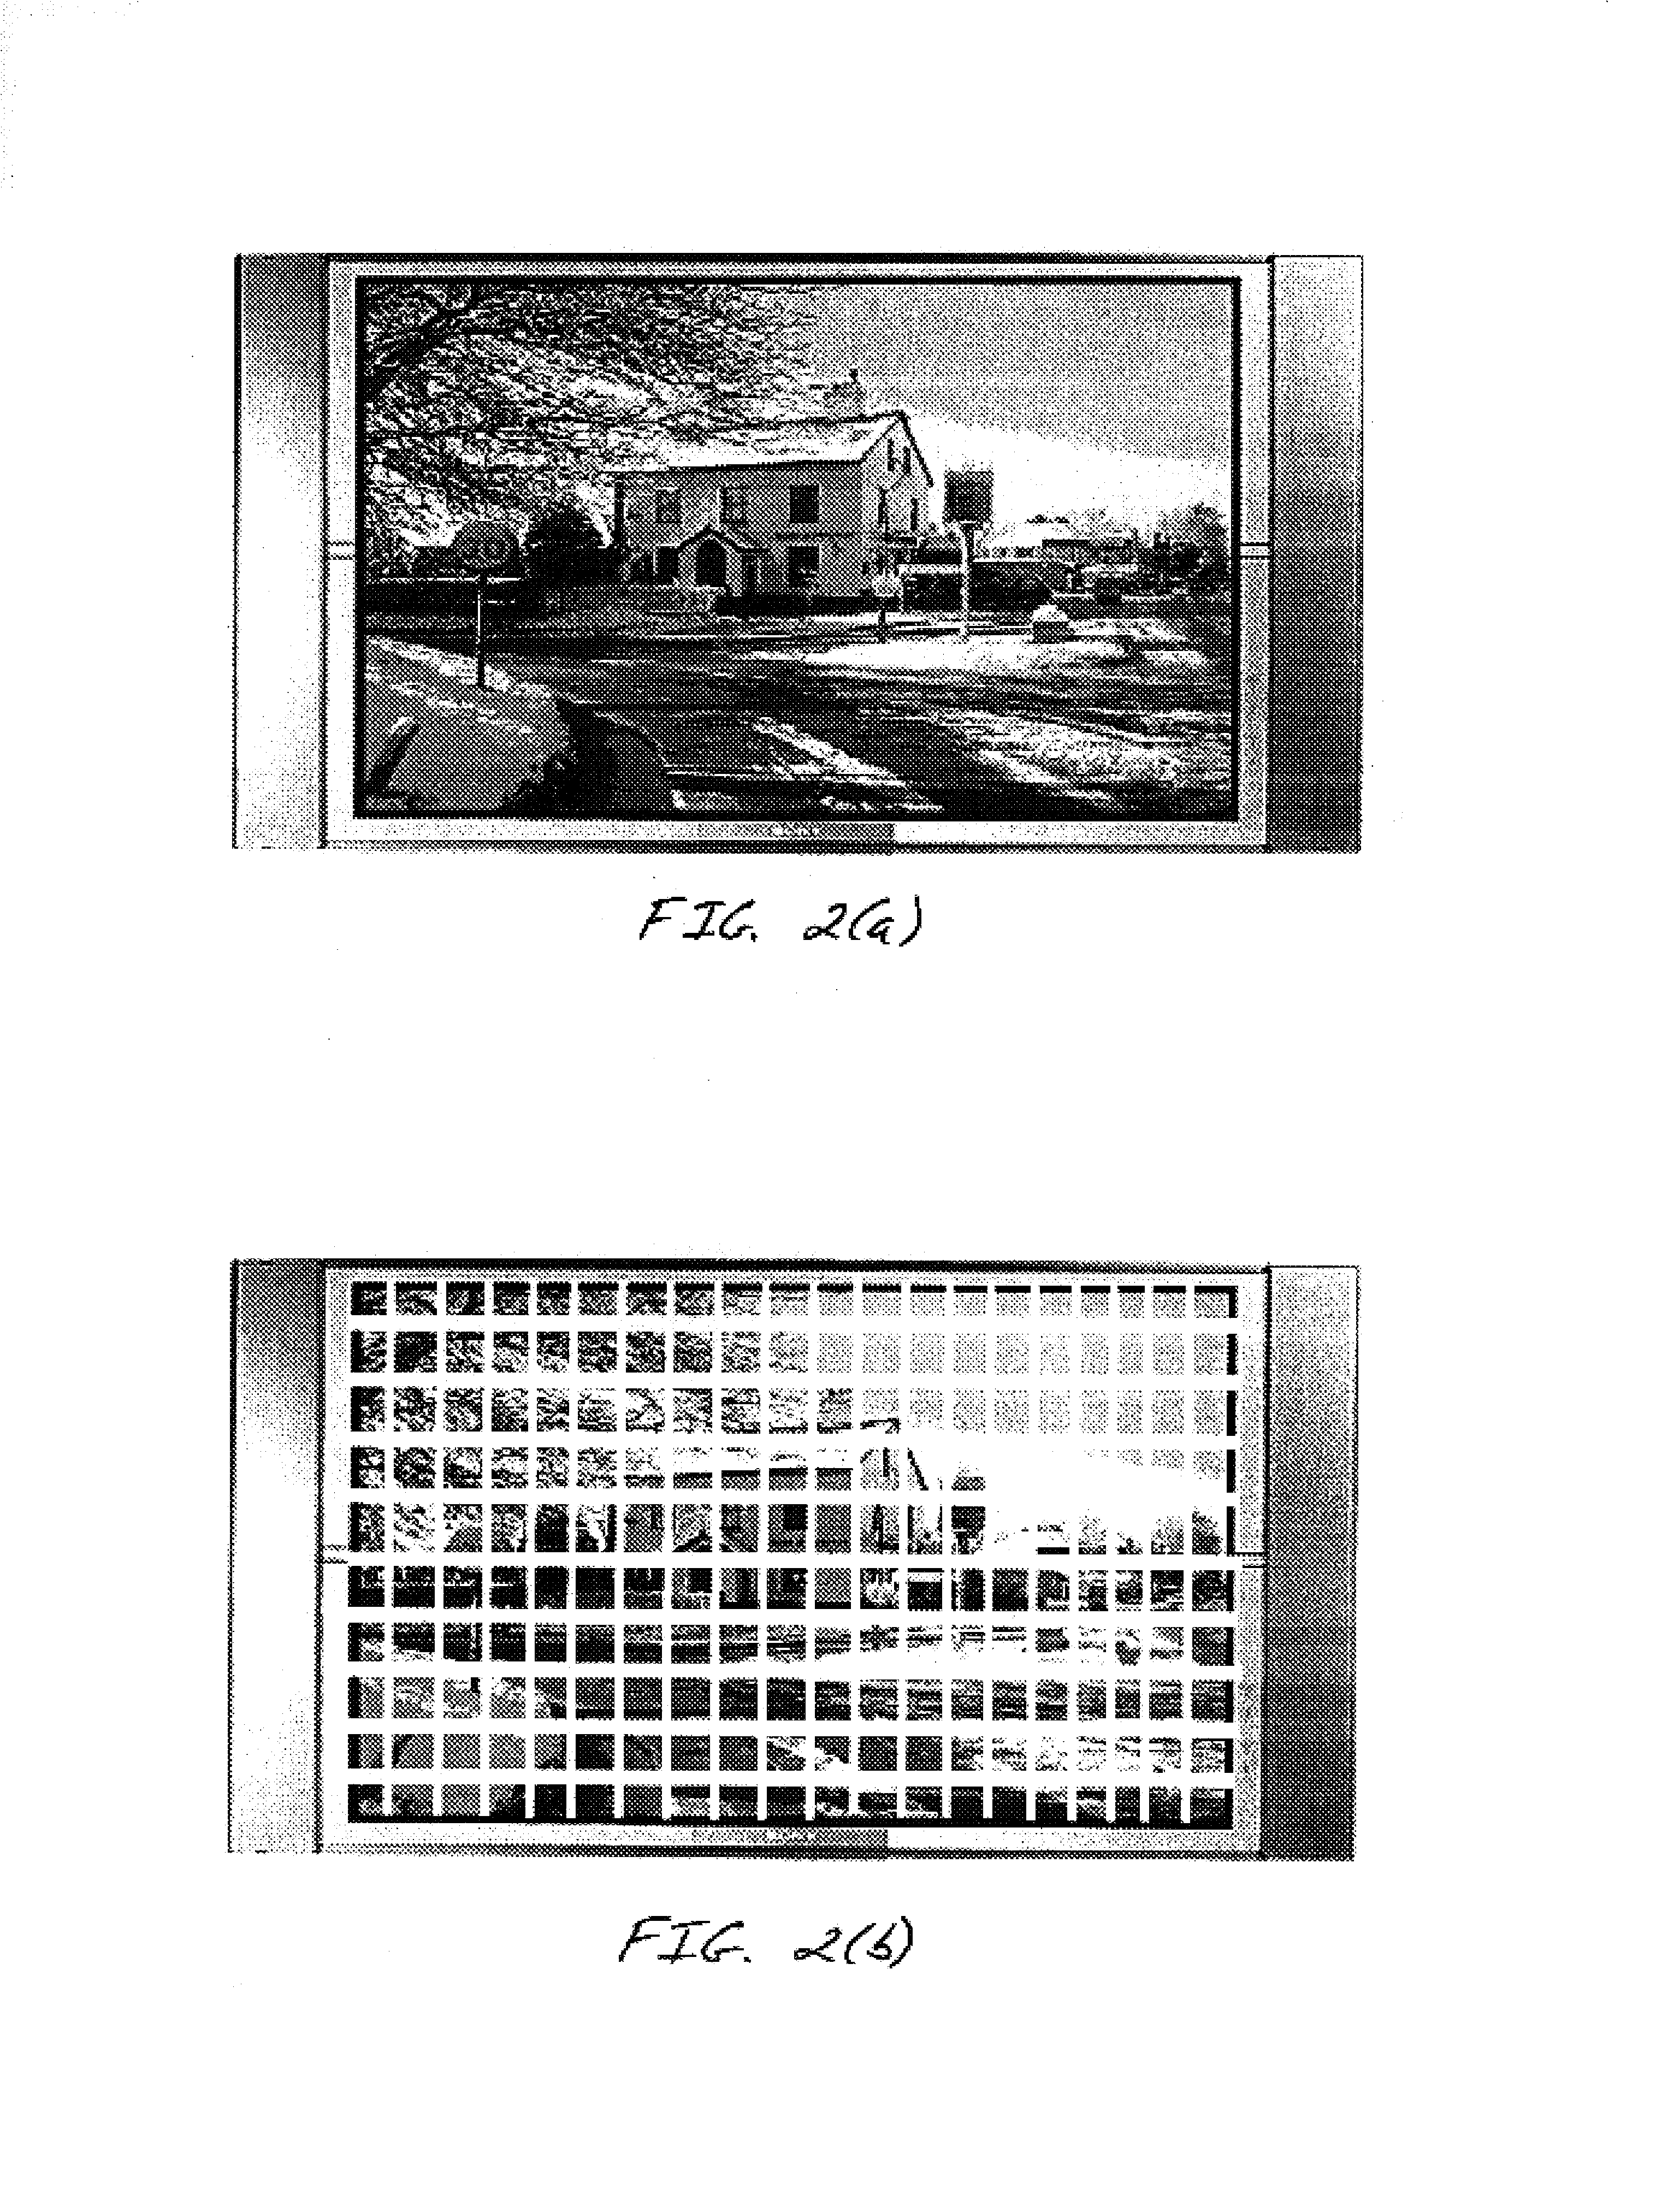 System and method for automatic zoom